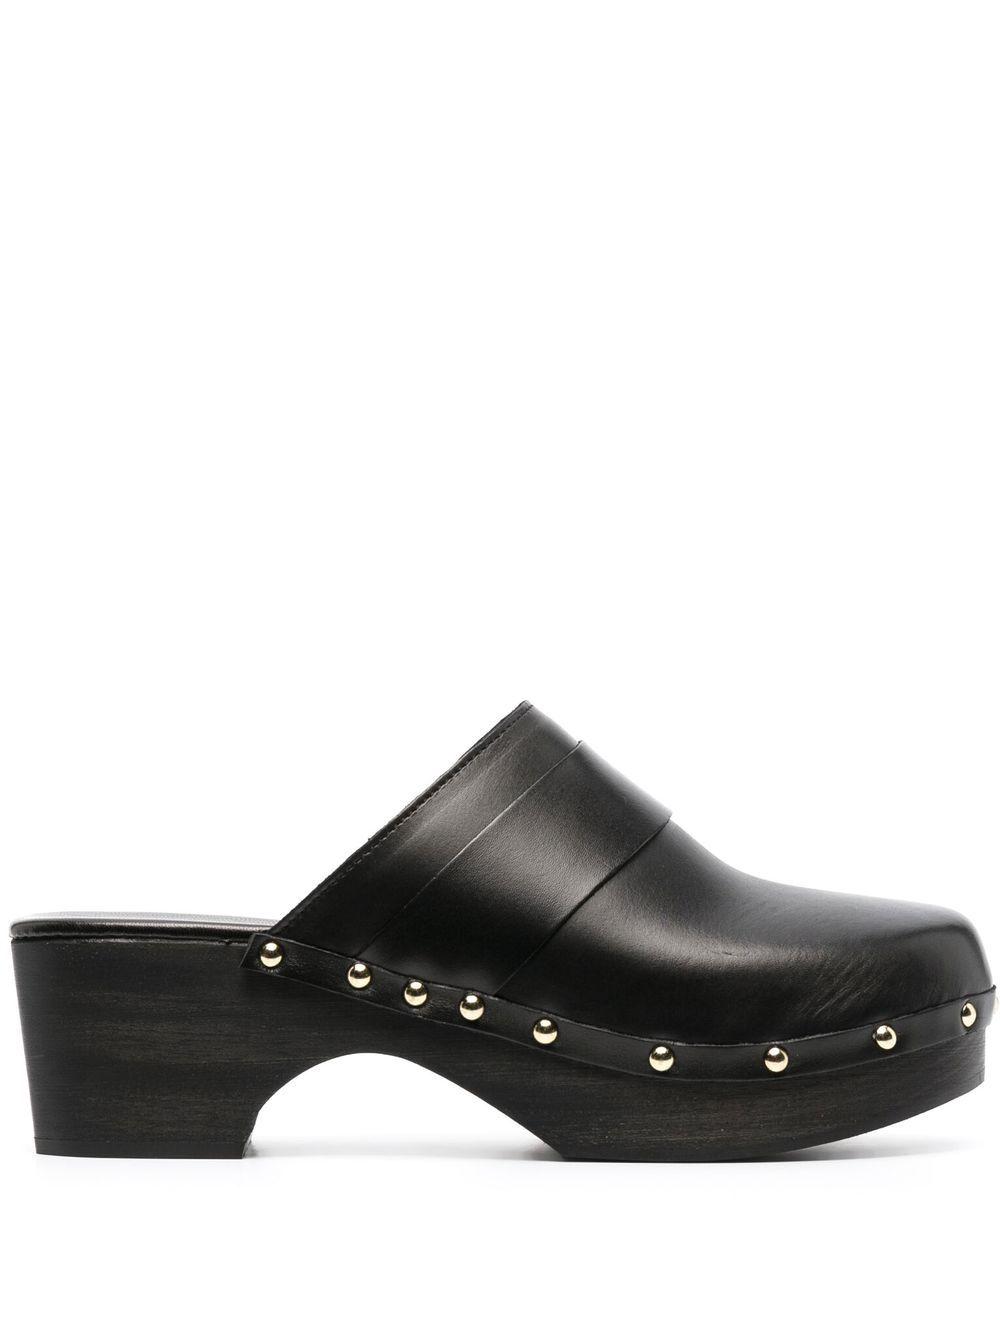 Aeyde Bibi 60mm Leather Wooden Clog in Black | Lyst